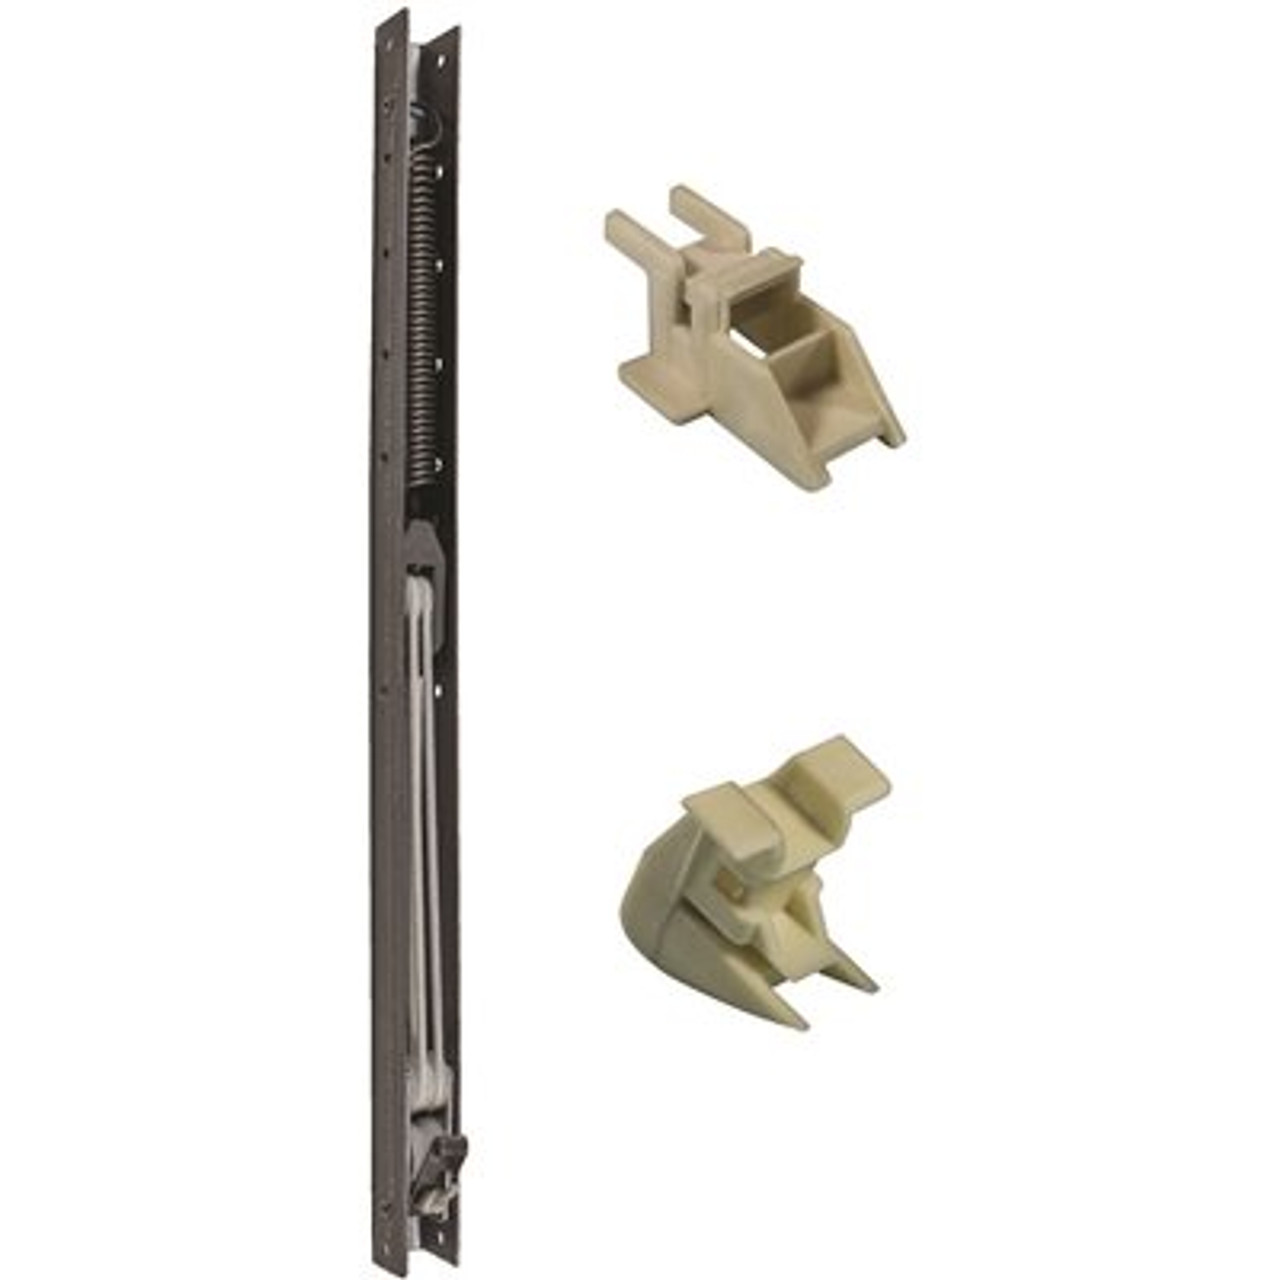 25 In. L Window Channel Balance 2410 With 9/16 In. W X 5/8 In. D Top And Bottom End Brackets Attached - 314413454